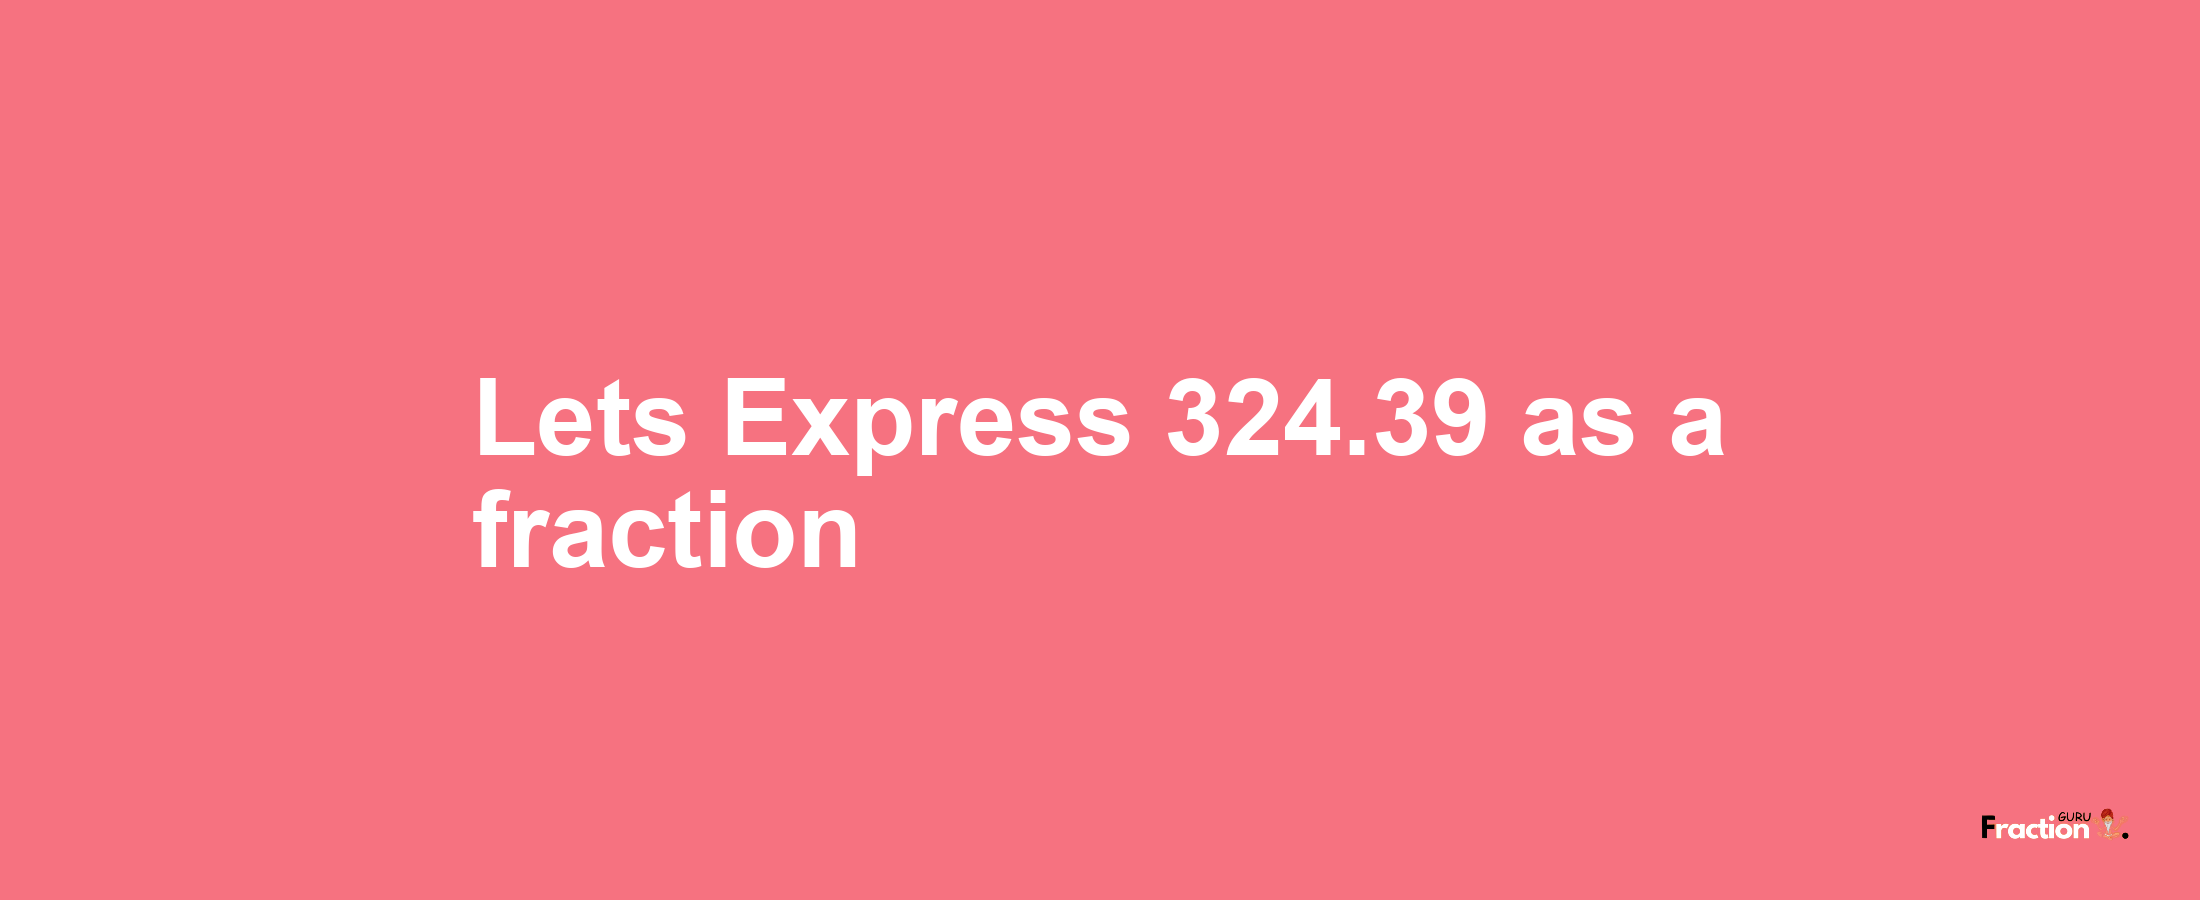 Lets Express 324.39 as afraction